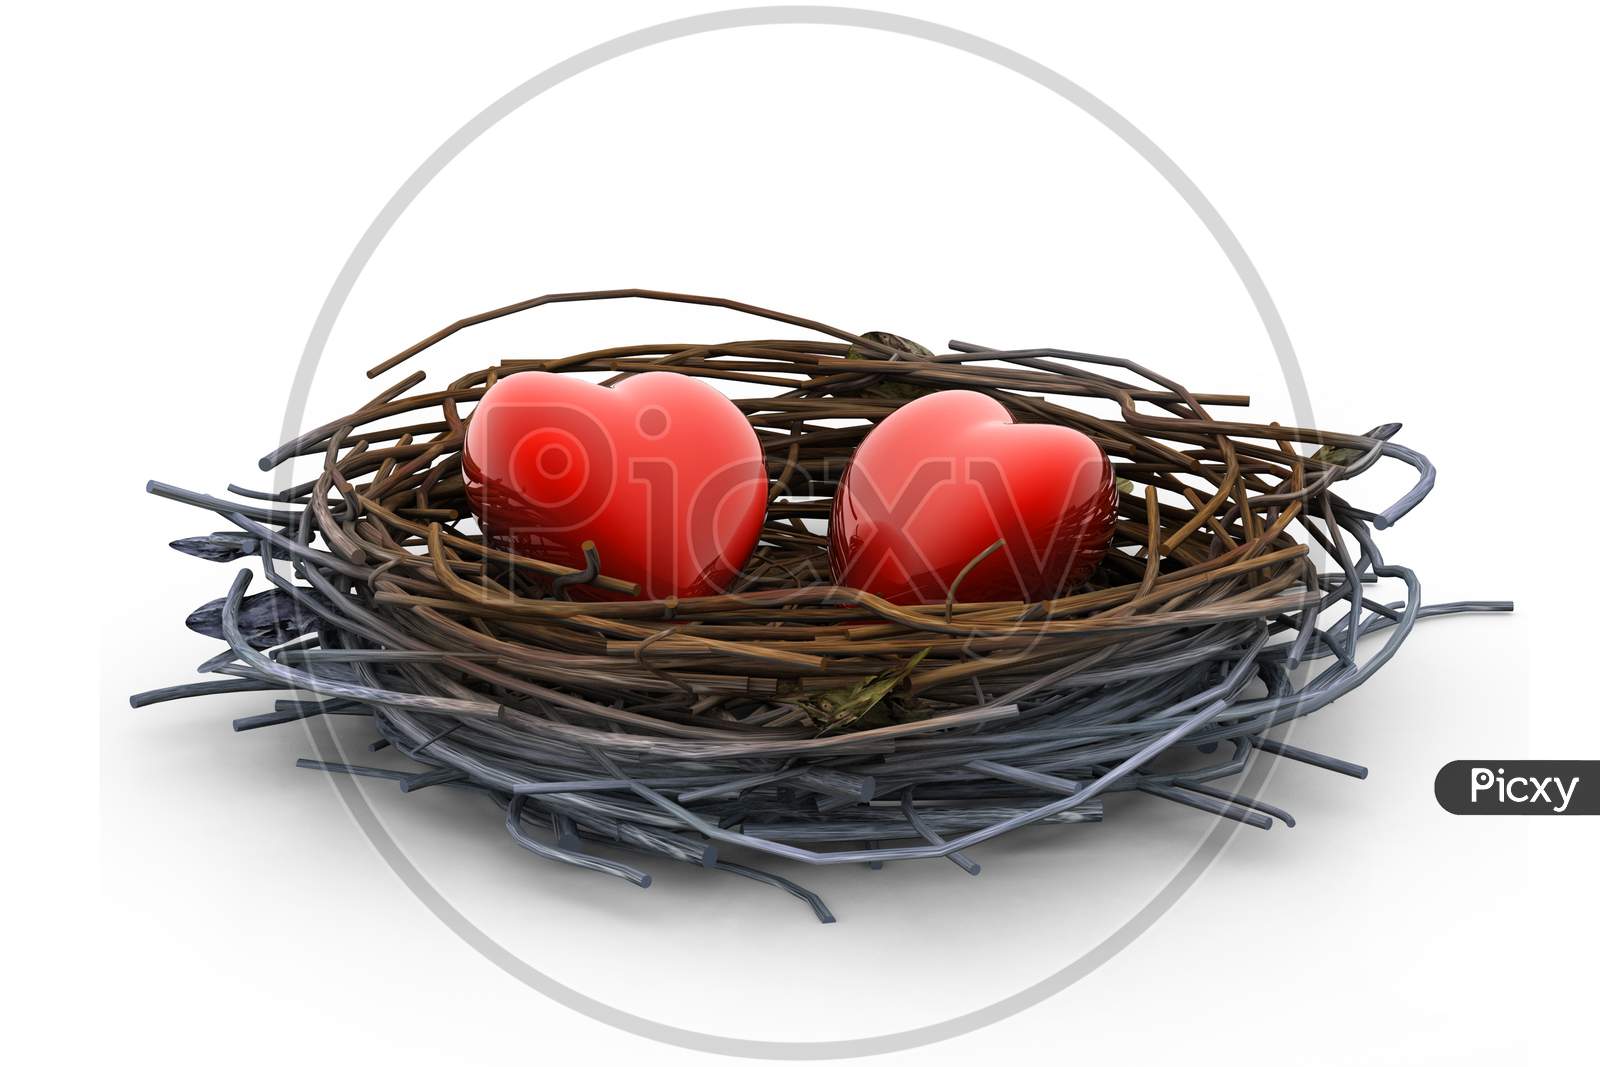 Two Love Hearts In Being Protected In A Nest. Conceptual Design